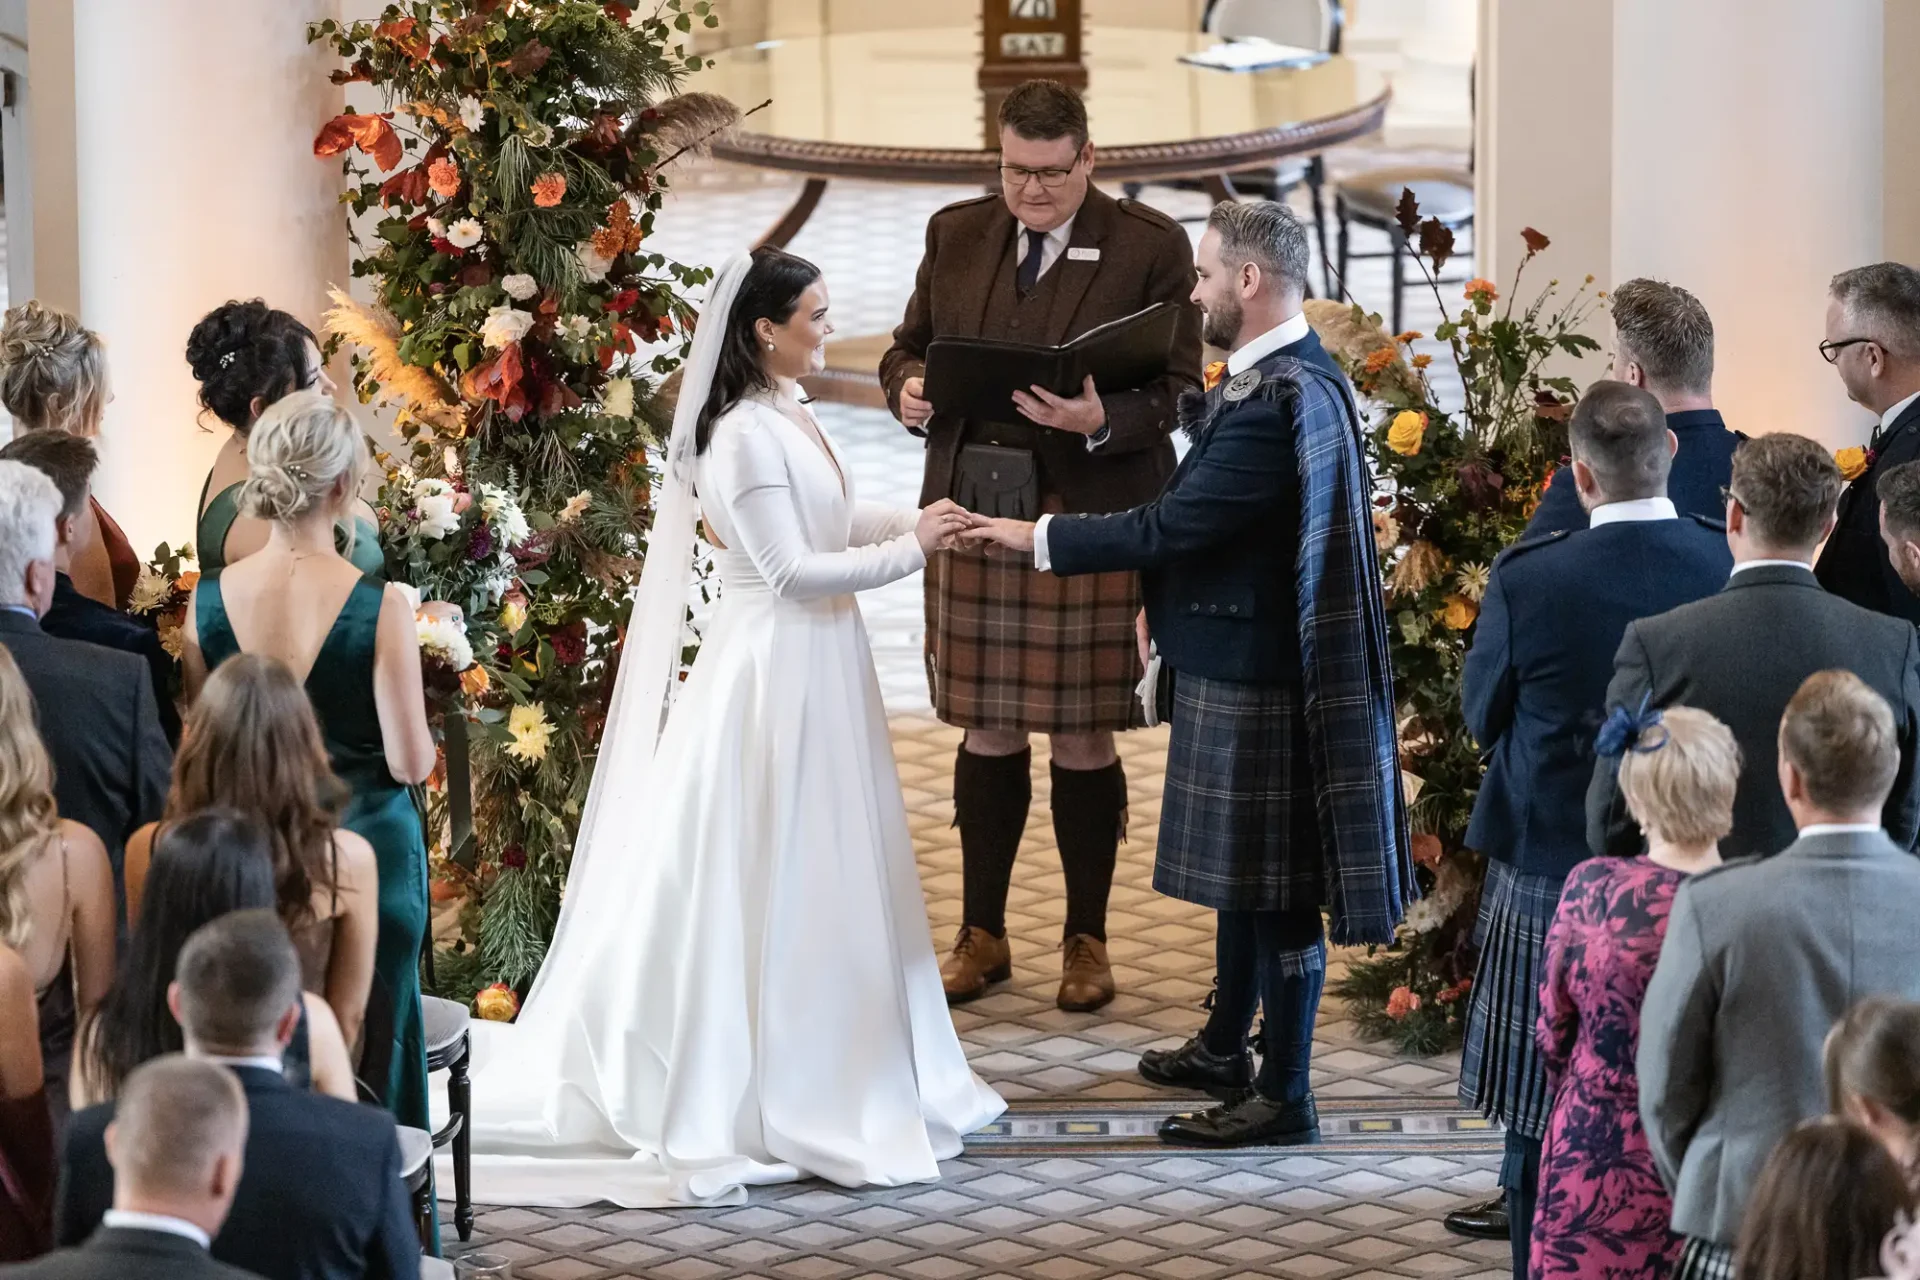 A bride and groom exchange vows in a wedding ceremony officiated by a man in a kilt, surrounded by guests and floral decorations in an elegant hall.